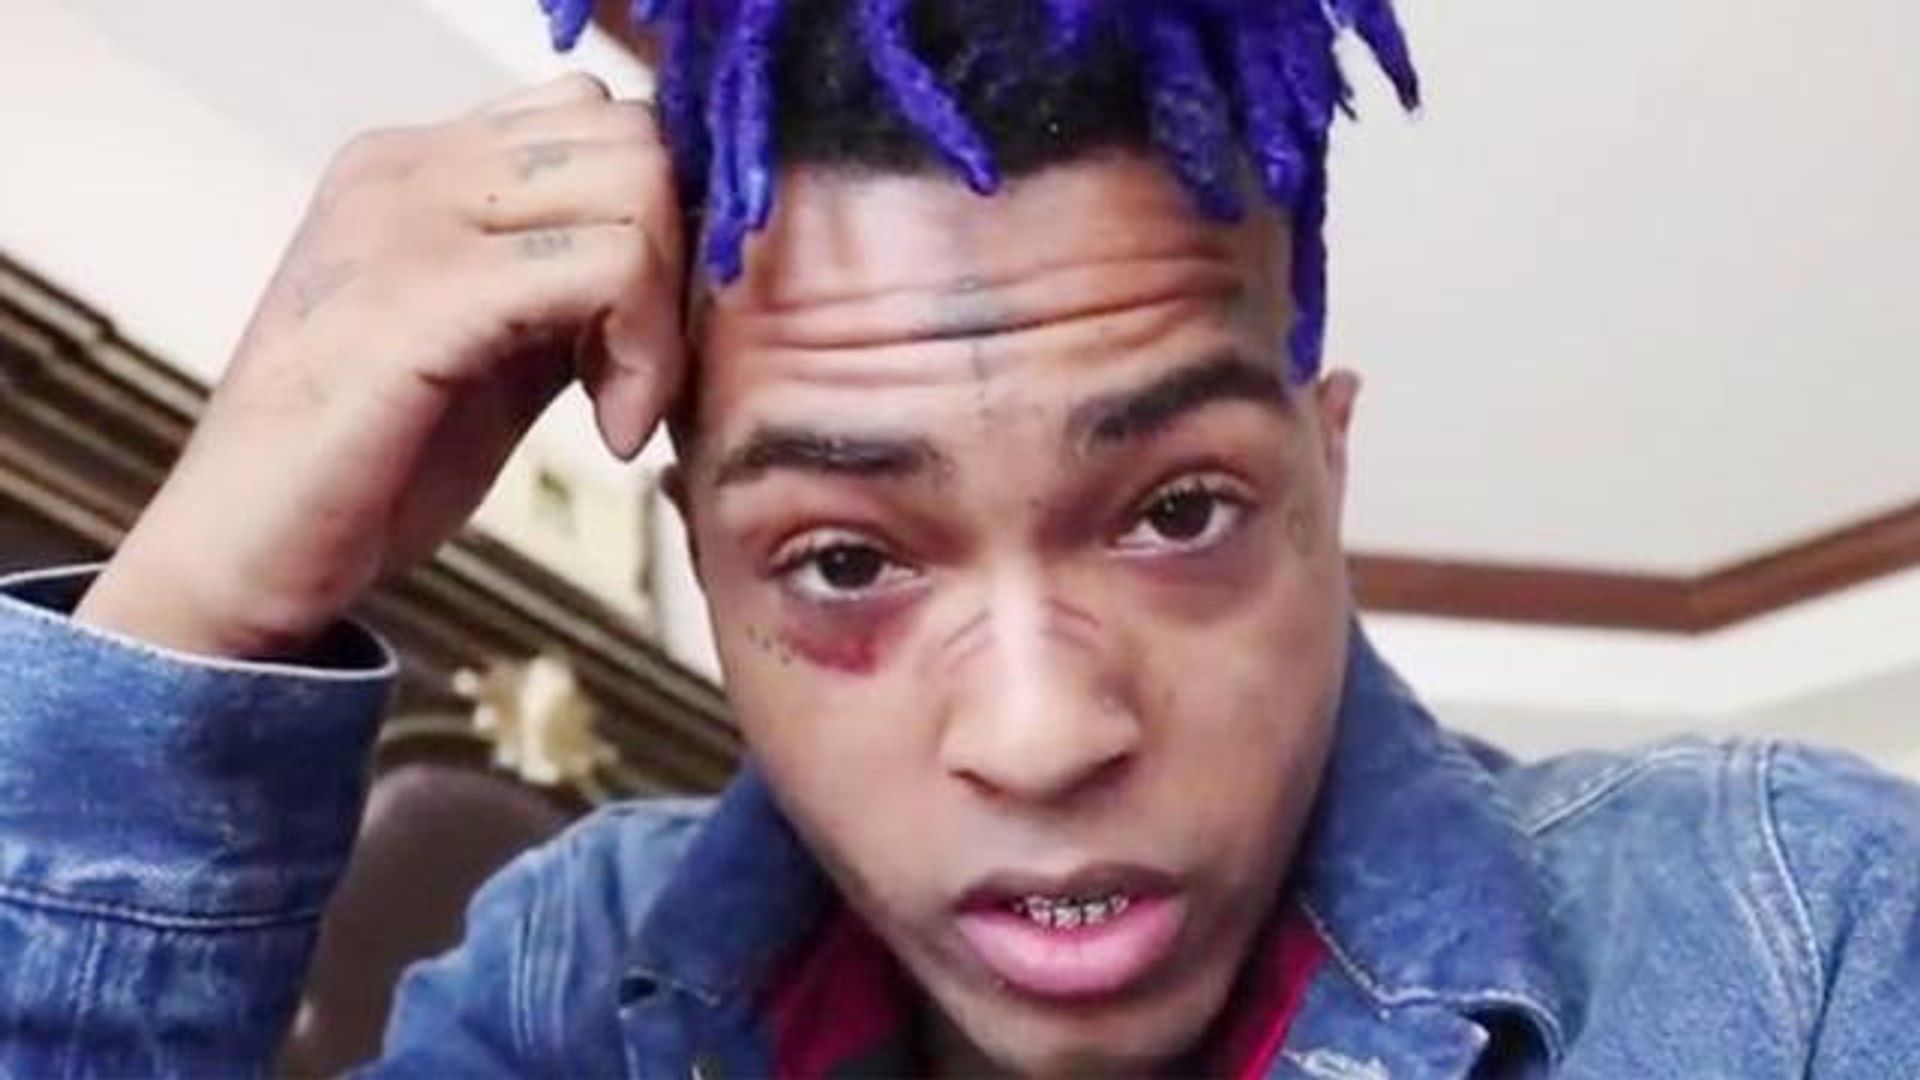 XXXTentacion's Blue Hair: The Story Behind His Iconic Look - wide 4